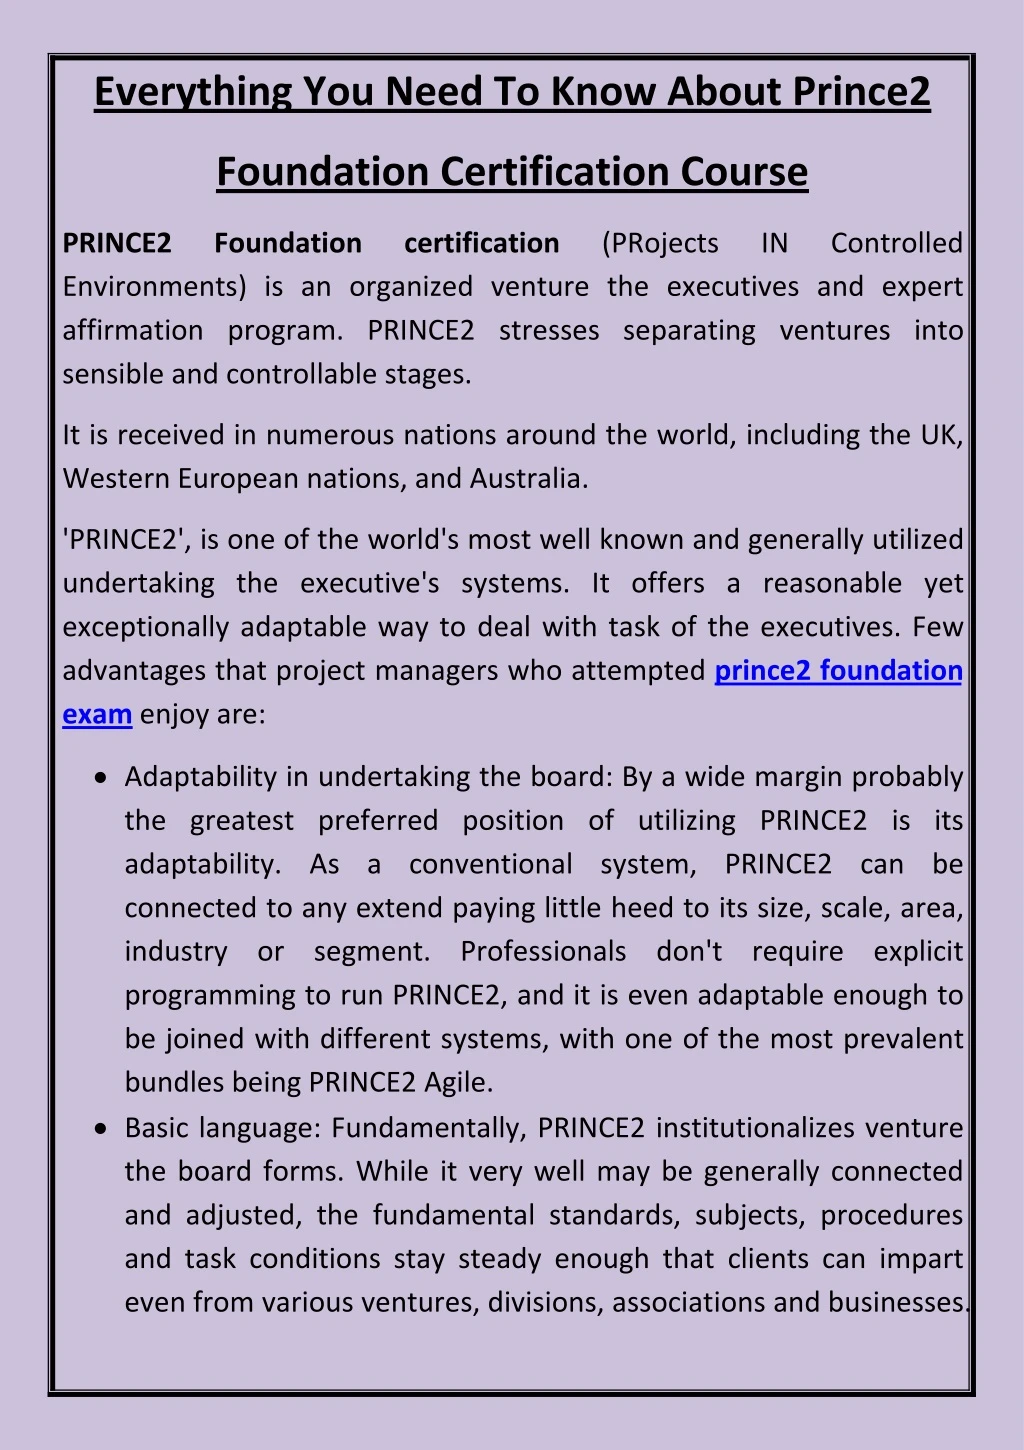 everything you need to know about prince2